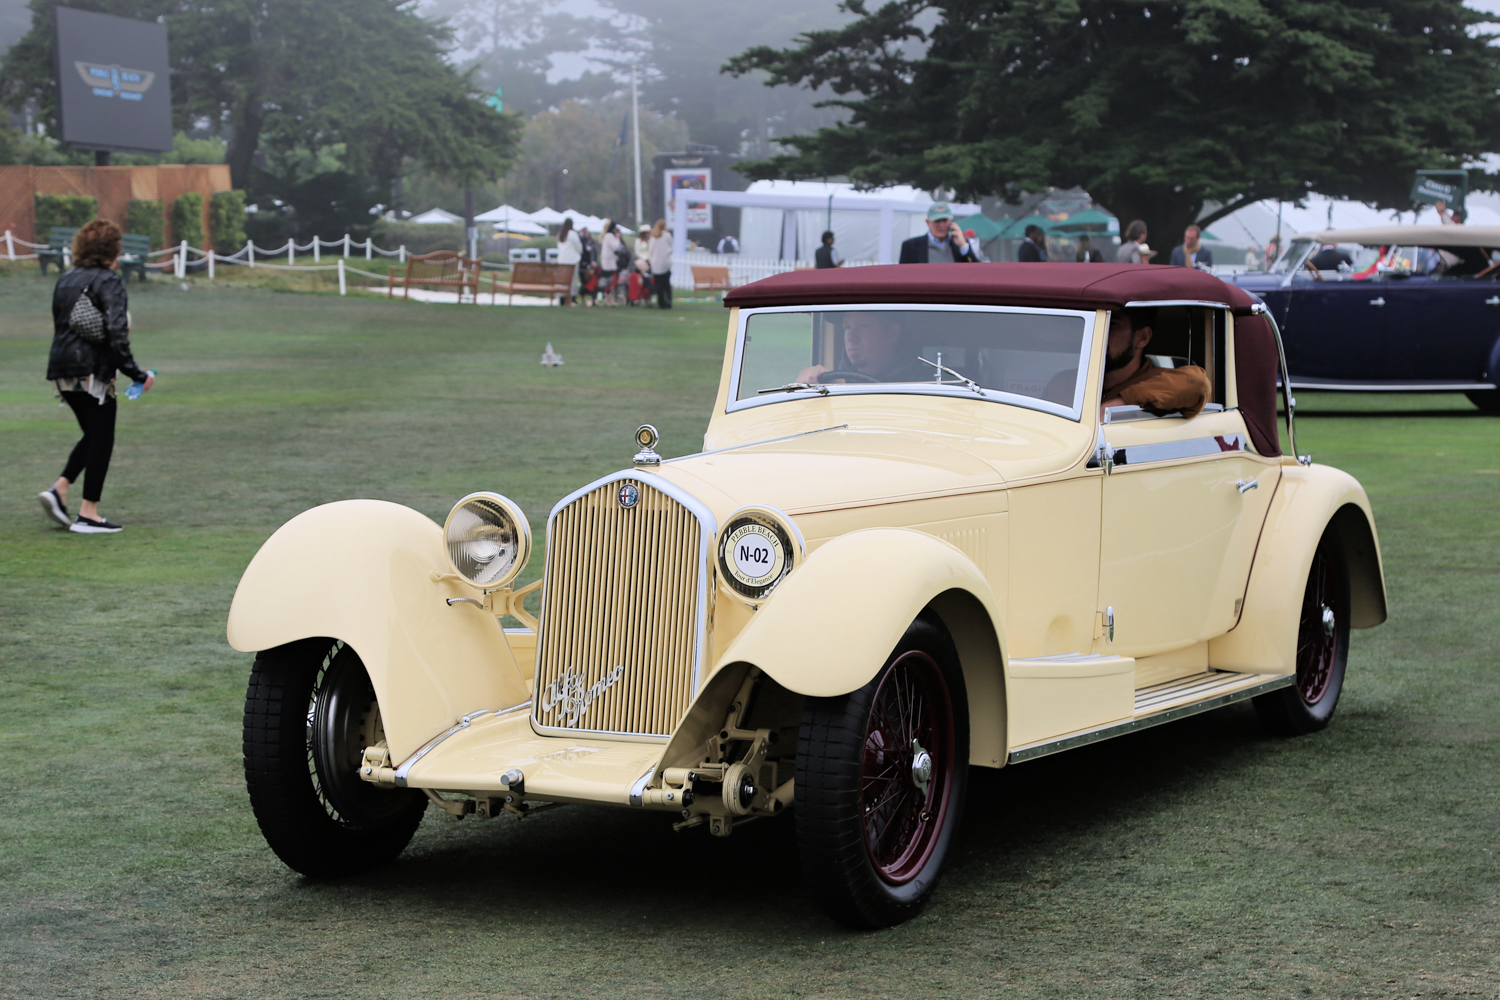 1932 Alfa Romeo 8C 2300 Graber Cabriolet  The Keller Collection at the Pyramids